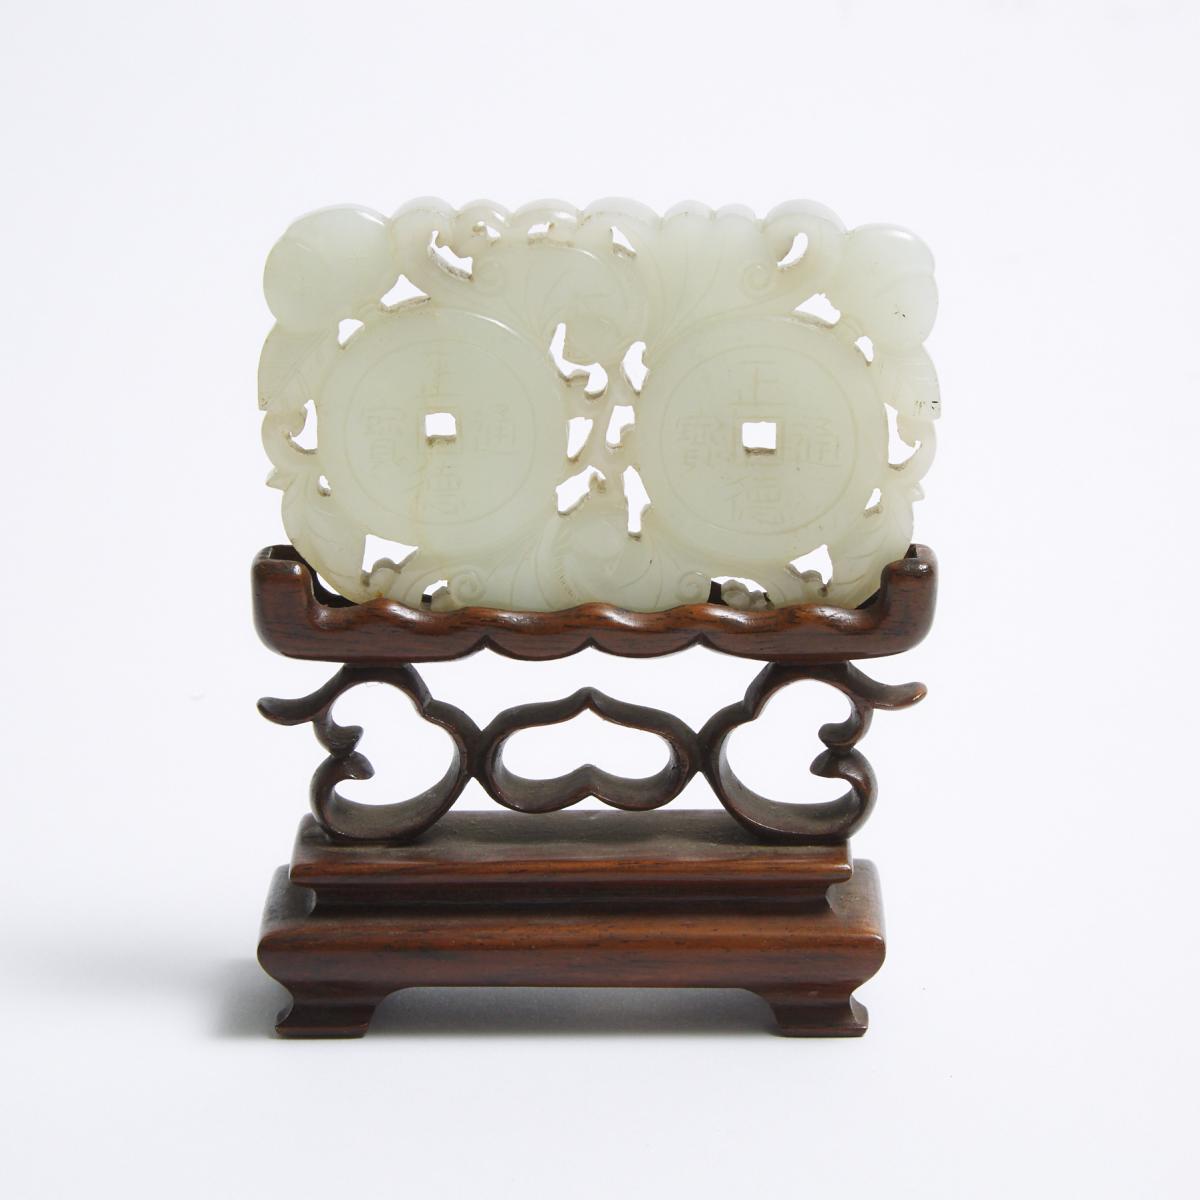 A Group of Three Pale Celadon Jade Carvings, Qing Dynasty, 清 青白玉雕一组三件, largest length 3.3 in — 8.3 c - Image 4 of 5